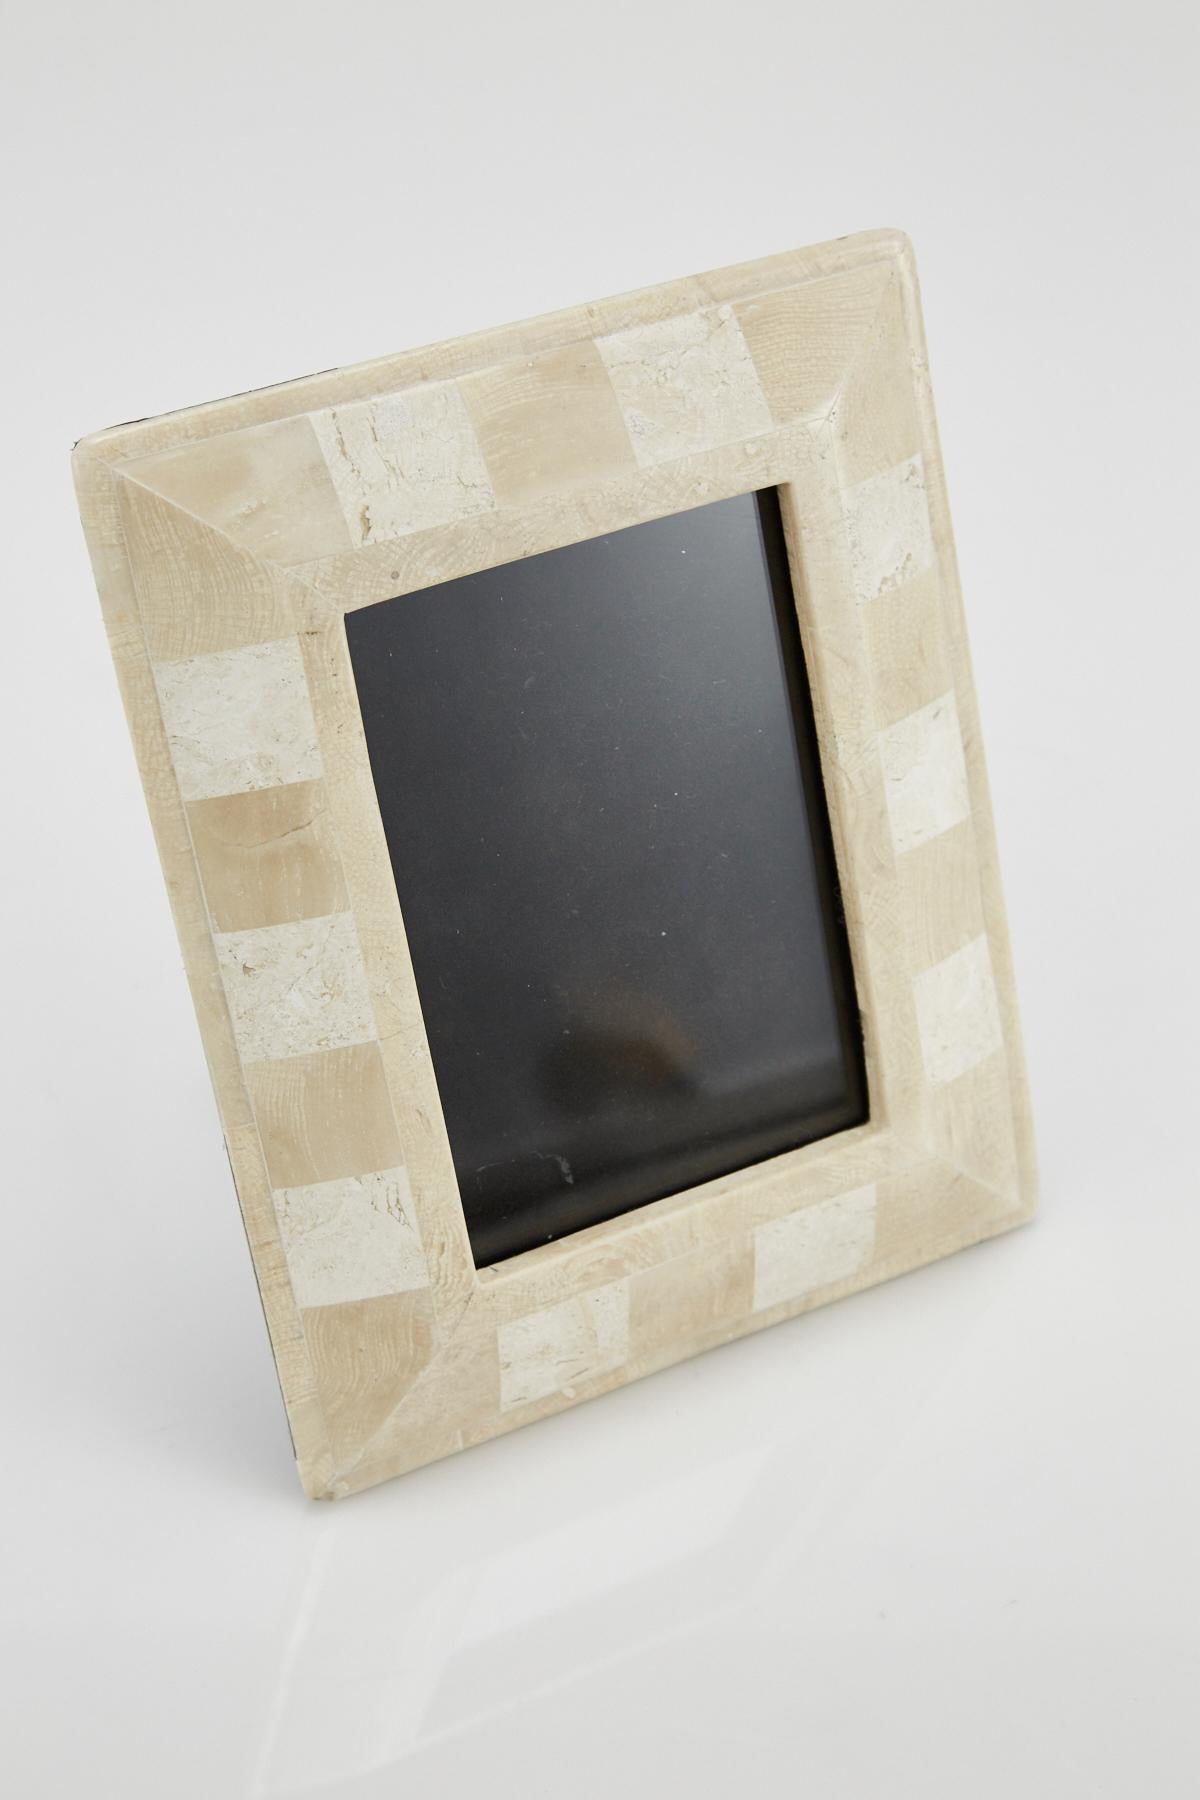 Rectangular picture frame in tessellated beige fossil stone with white stone squares surrounding the frame face. Black felt back. Opening for picture measures 6 1/2 x 4 1/2 in., frame overall measures 10 x 8 in.

All furnishings are made from 100%